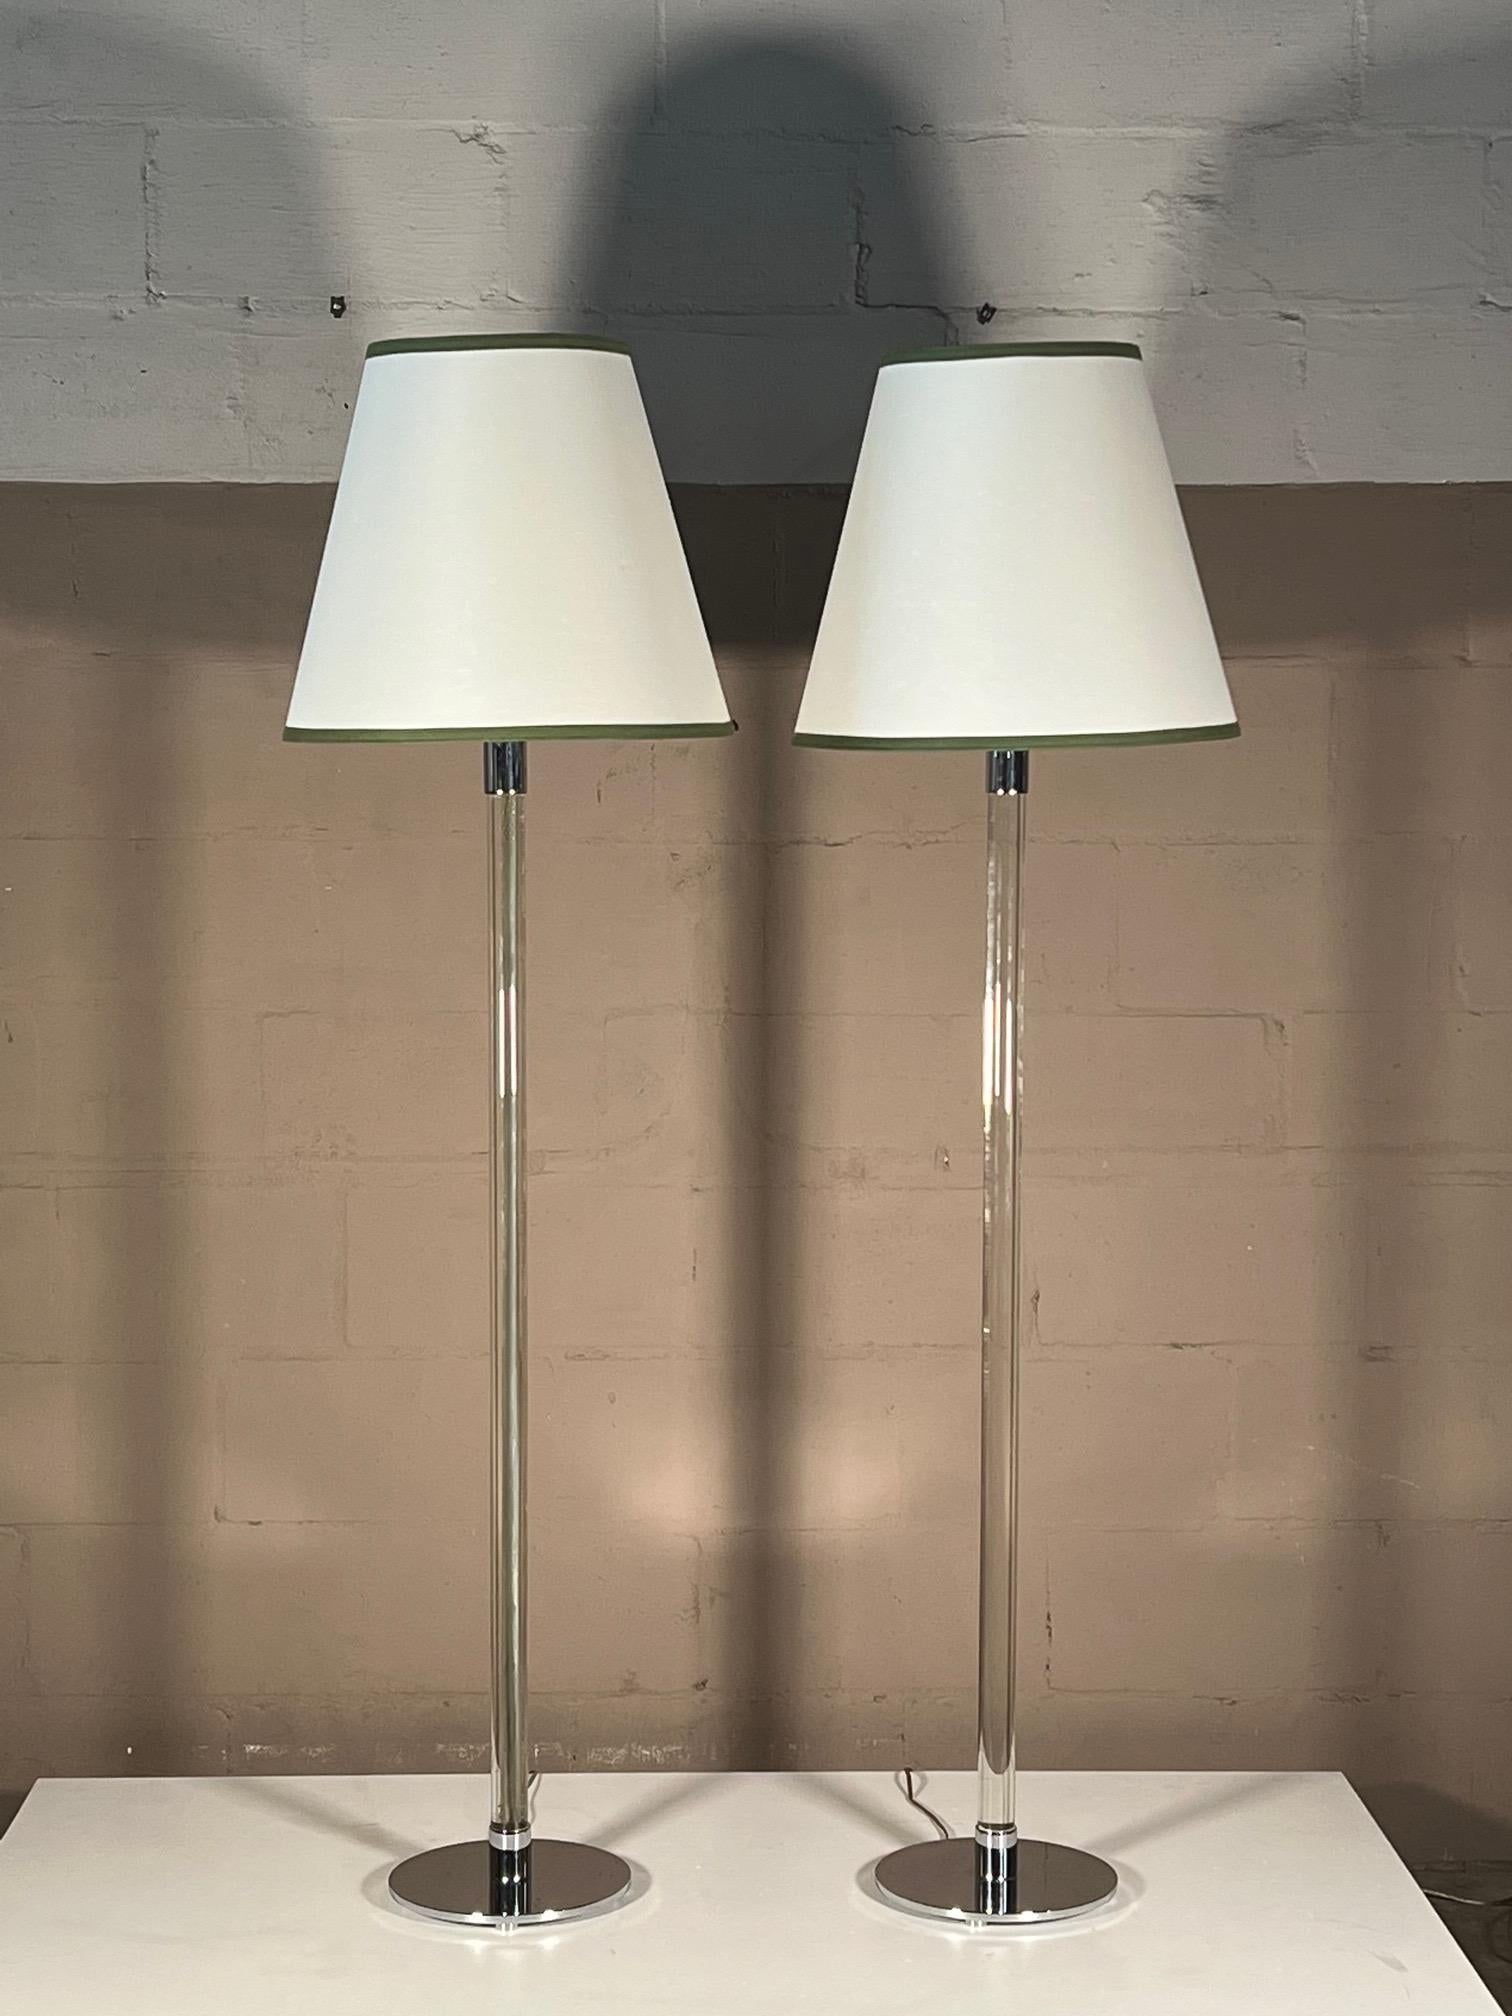 A pair of elegant glass rod floor lamps by Hansen Lighting, NYC-each base stamped. Chrome steel, each lamp with three sockets and adjustable height for shades.